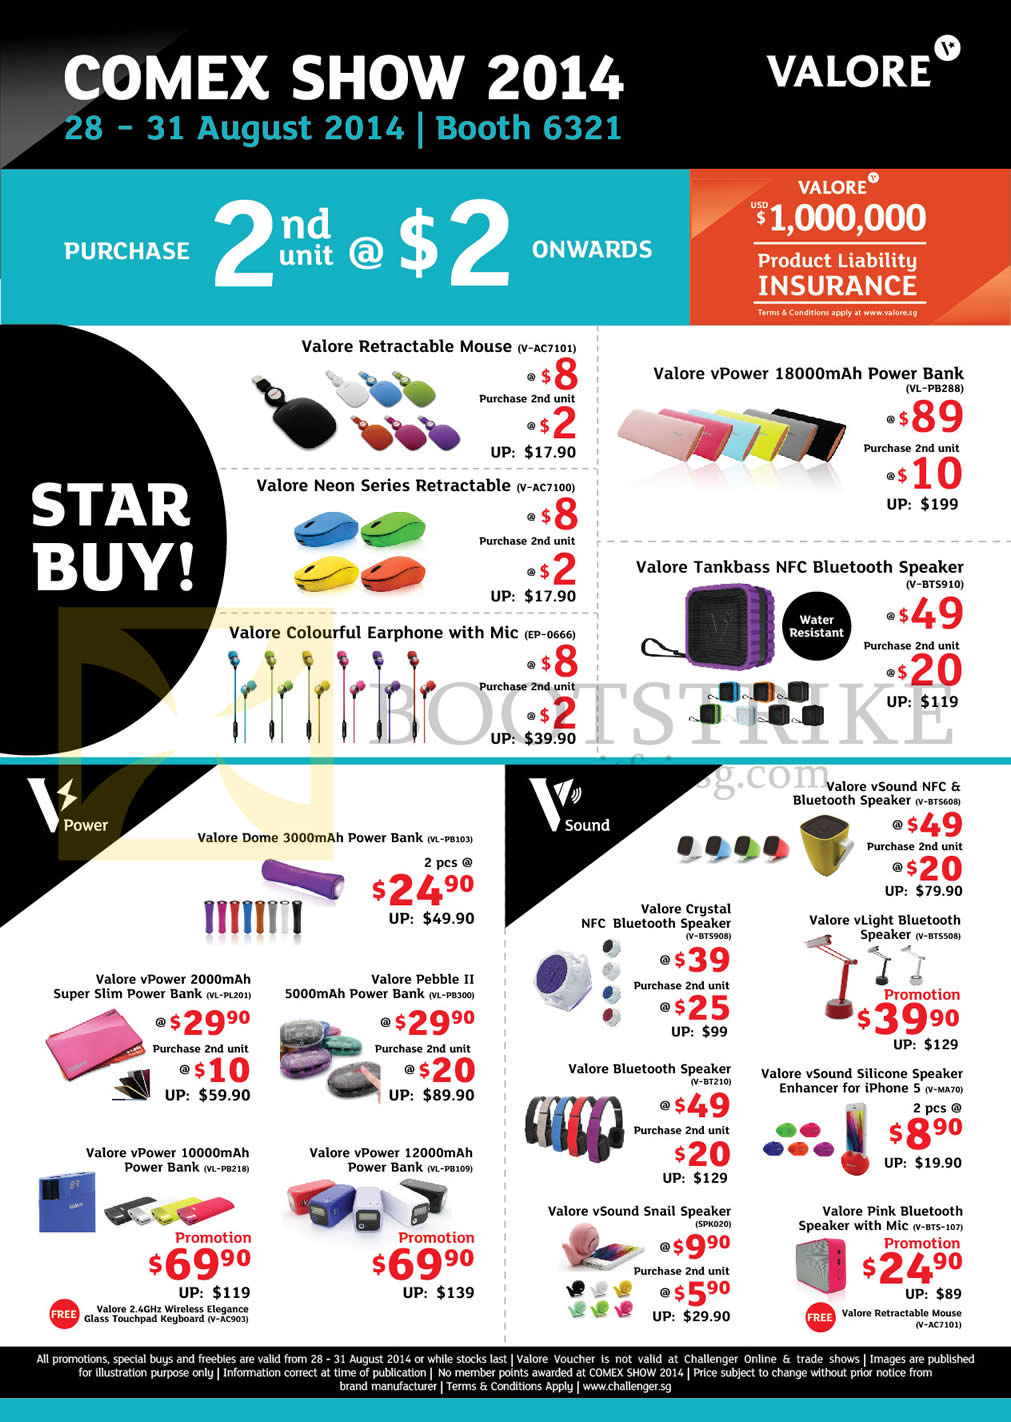 COMEX 2014 price list image brochure of Challenger Valore Accessories Mouse, VPower Power Bank, Tankbass Bluetooth Speaker, Earphone, VPower, VSound, Pebble